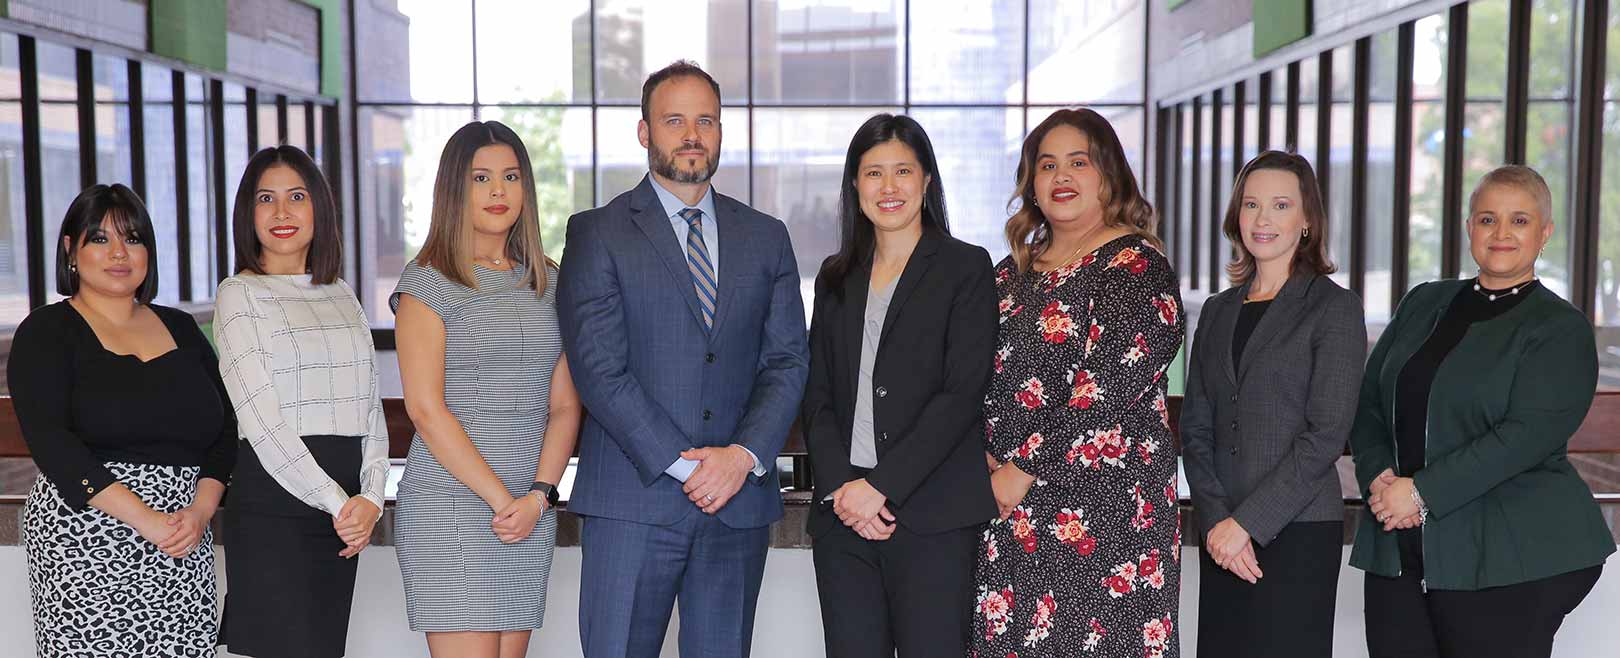 Staff of the Law Office Of Daniel Stewart PLLC Immigration Law.